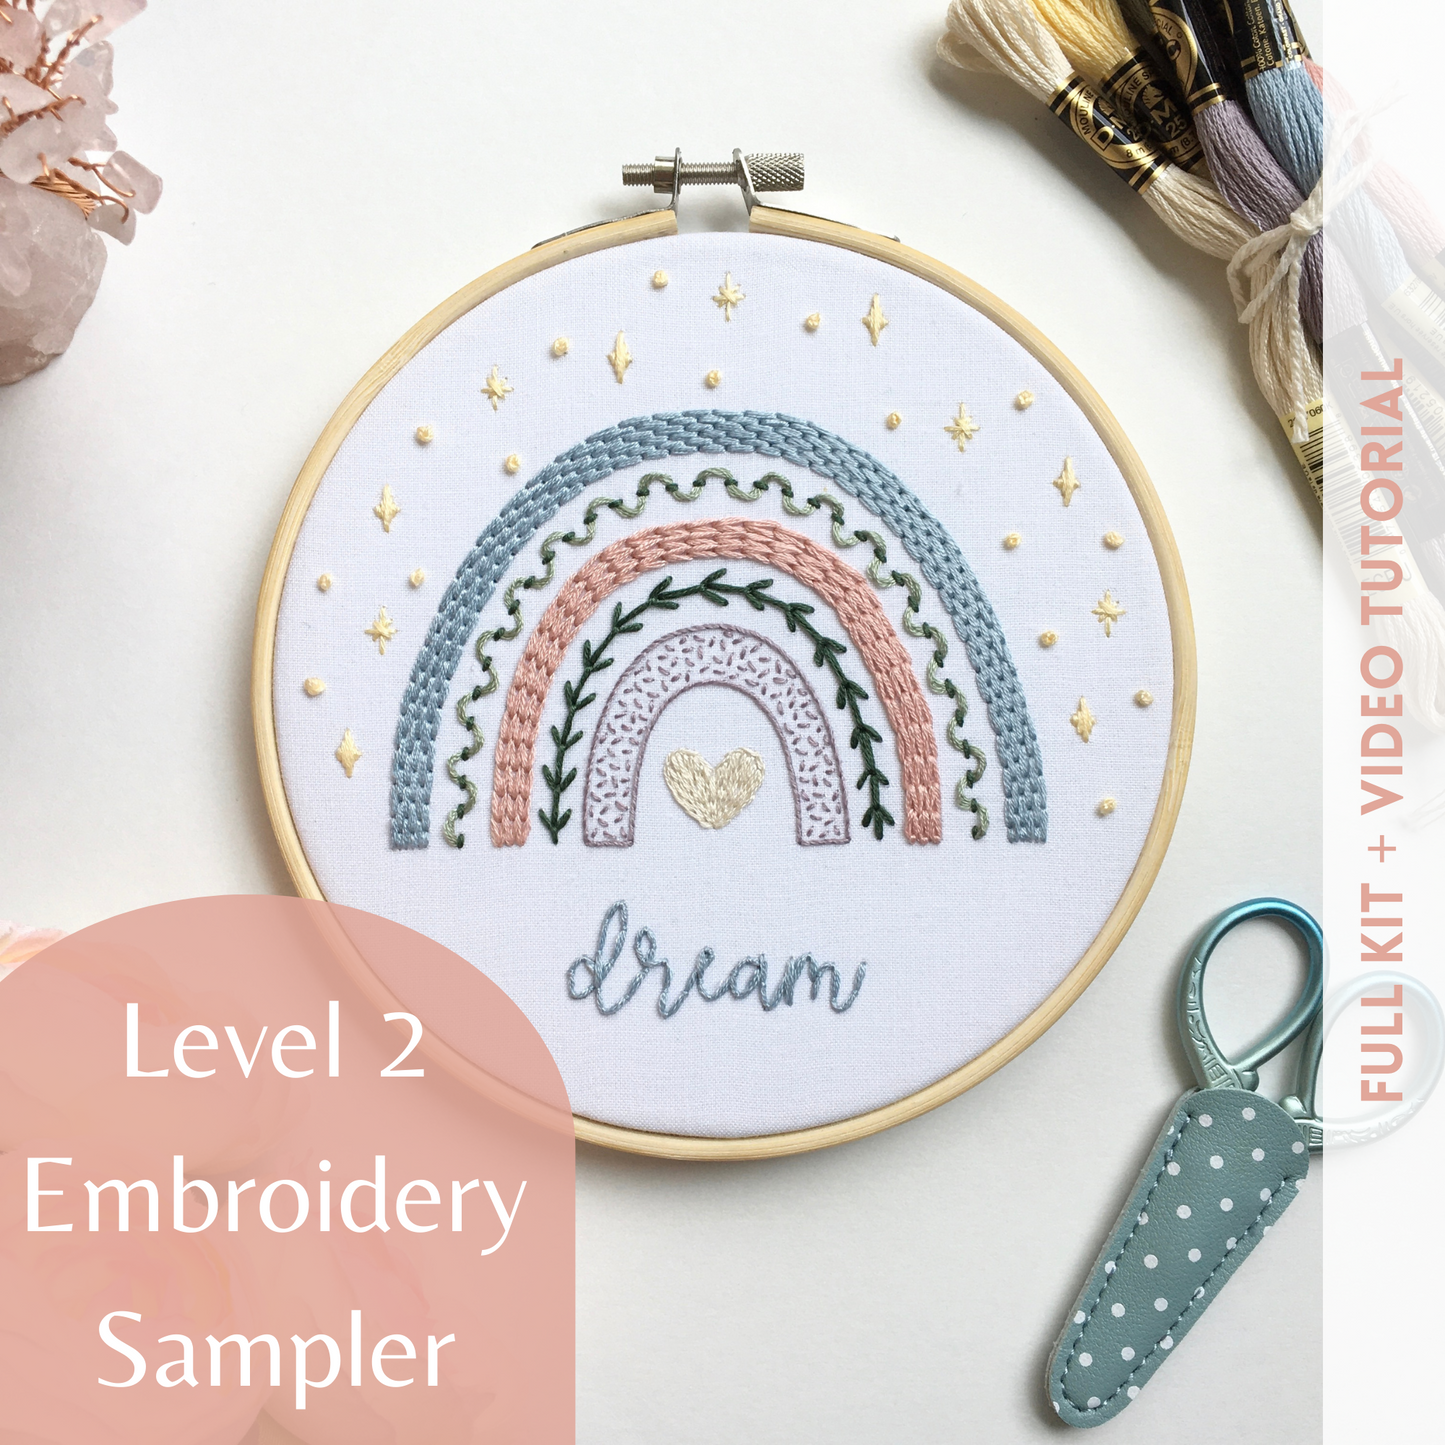 enchanting rainbow sampler embroidery kit by Eight22Crafts